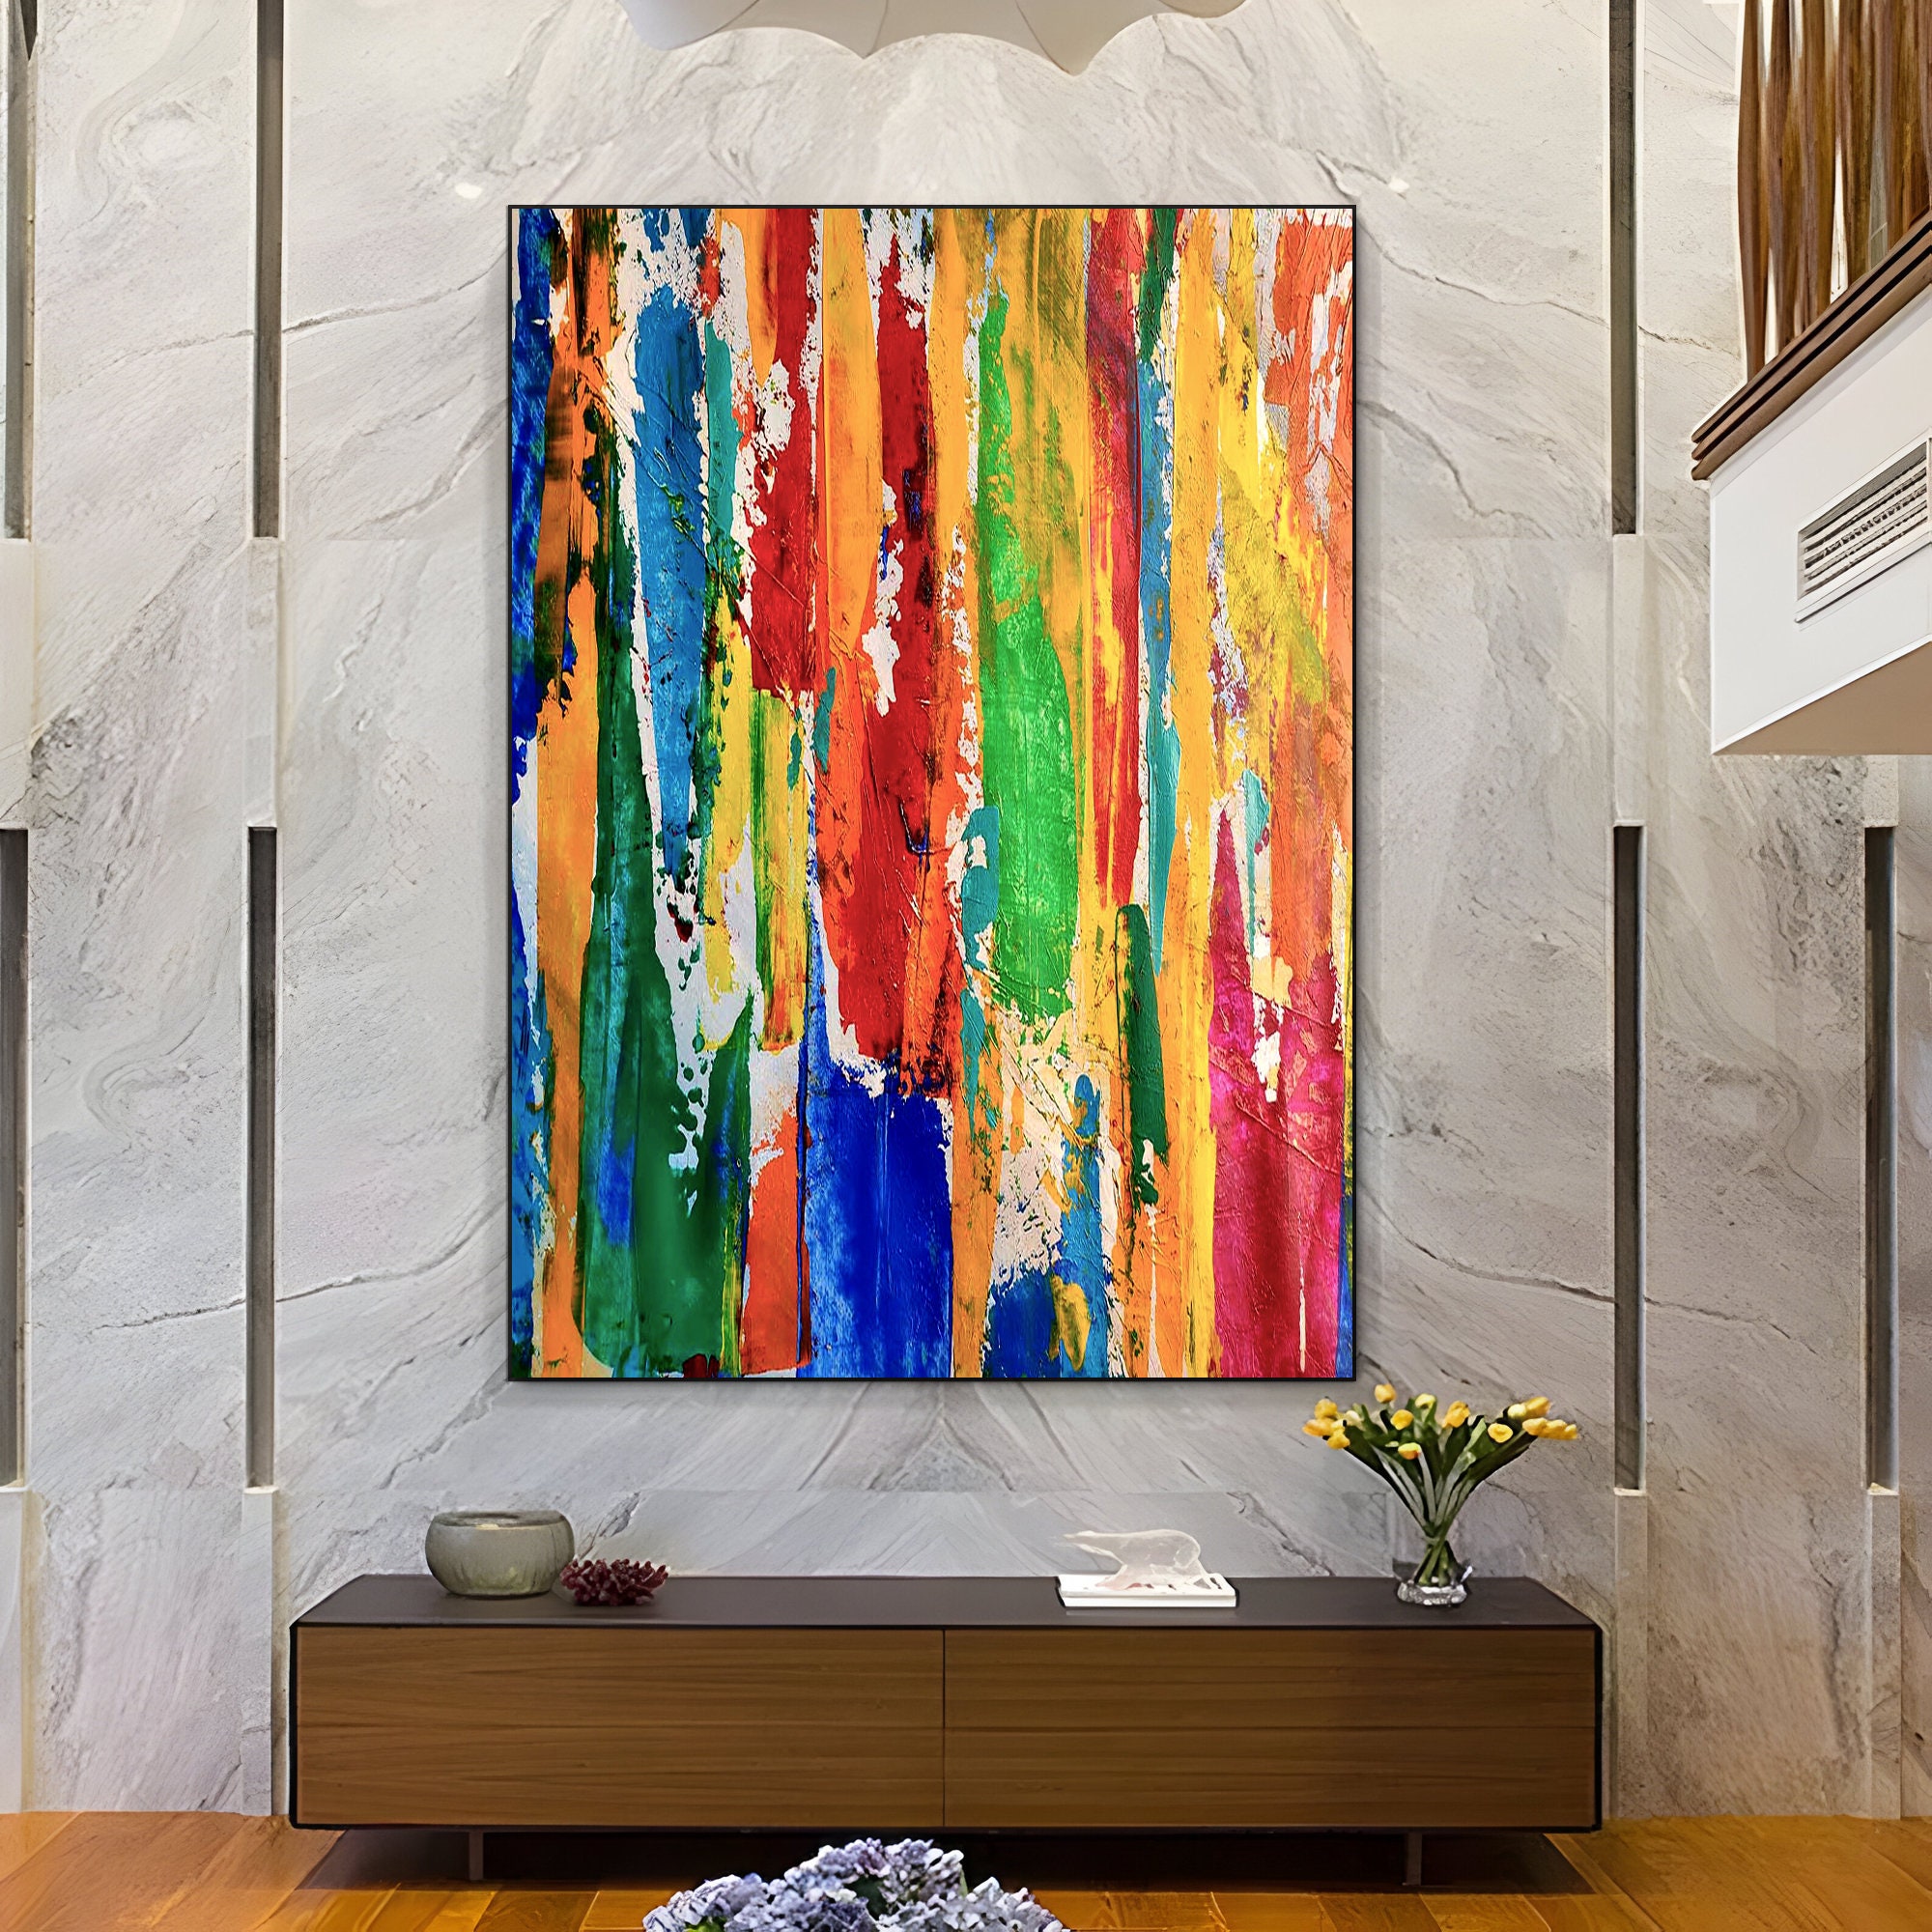 Acrylic Painting, Canvas Abstract, Abstract, Wall Decor, Large oil painting,  Acrylics paint, Big Abstract Art, Art [pat466] - $199.00 : Handmade Large  Abstract Painting On Canvas